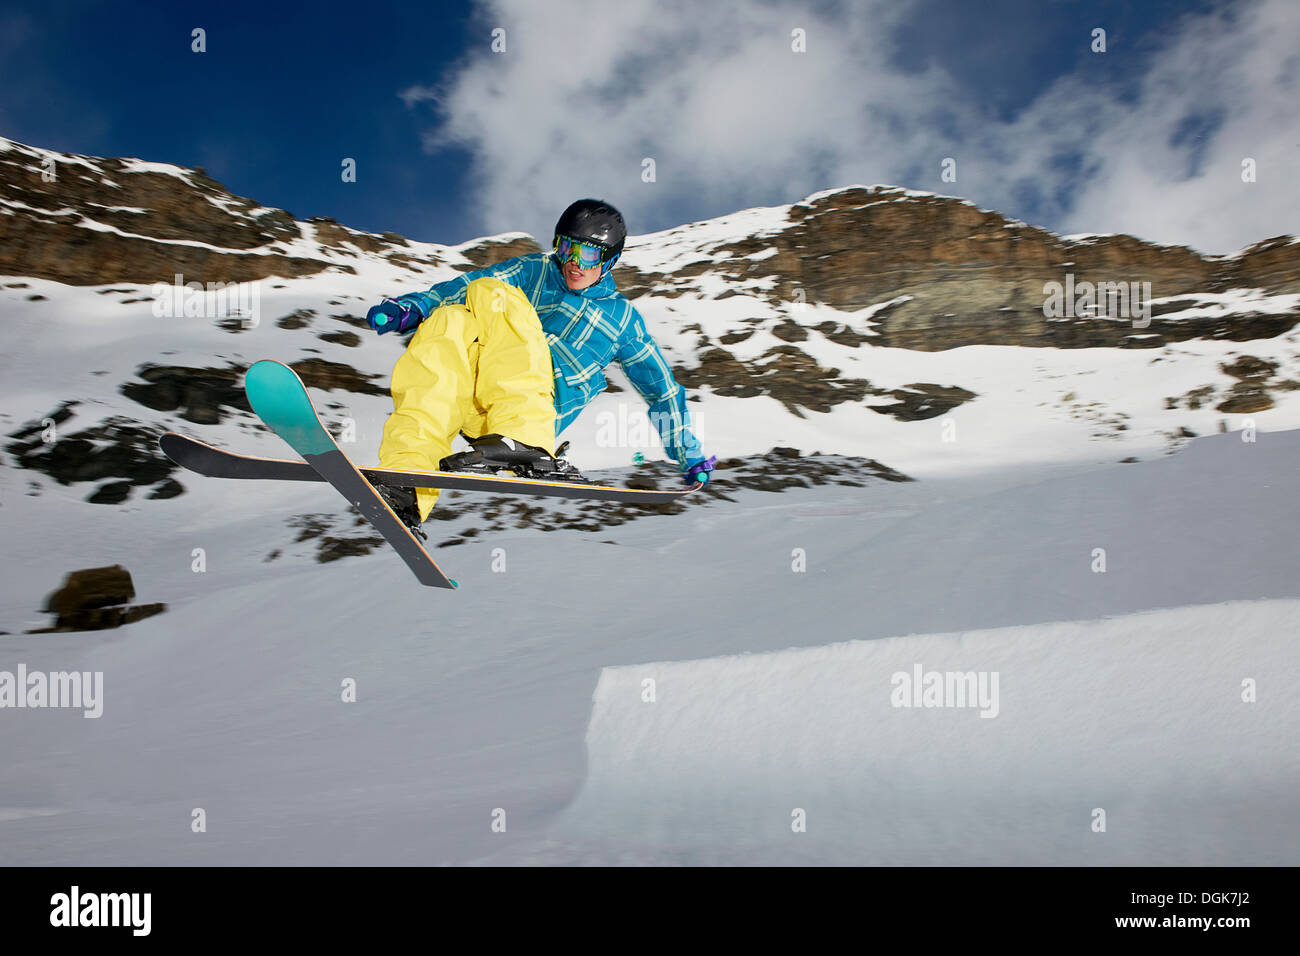 Male skier mid air with crossed skis Stock Photo